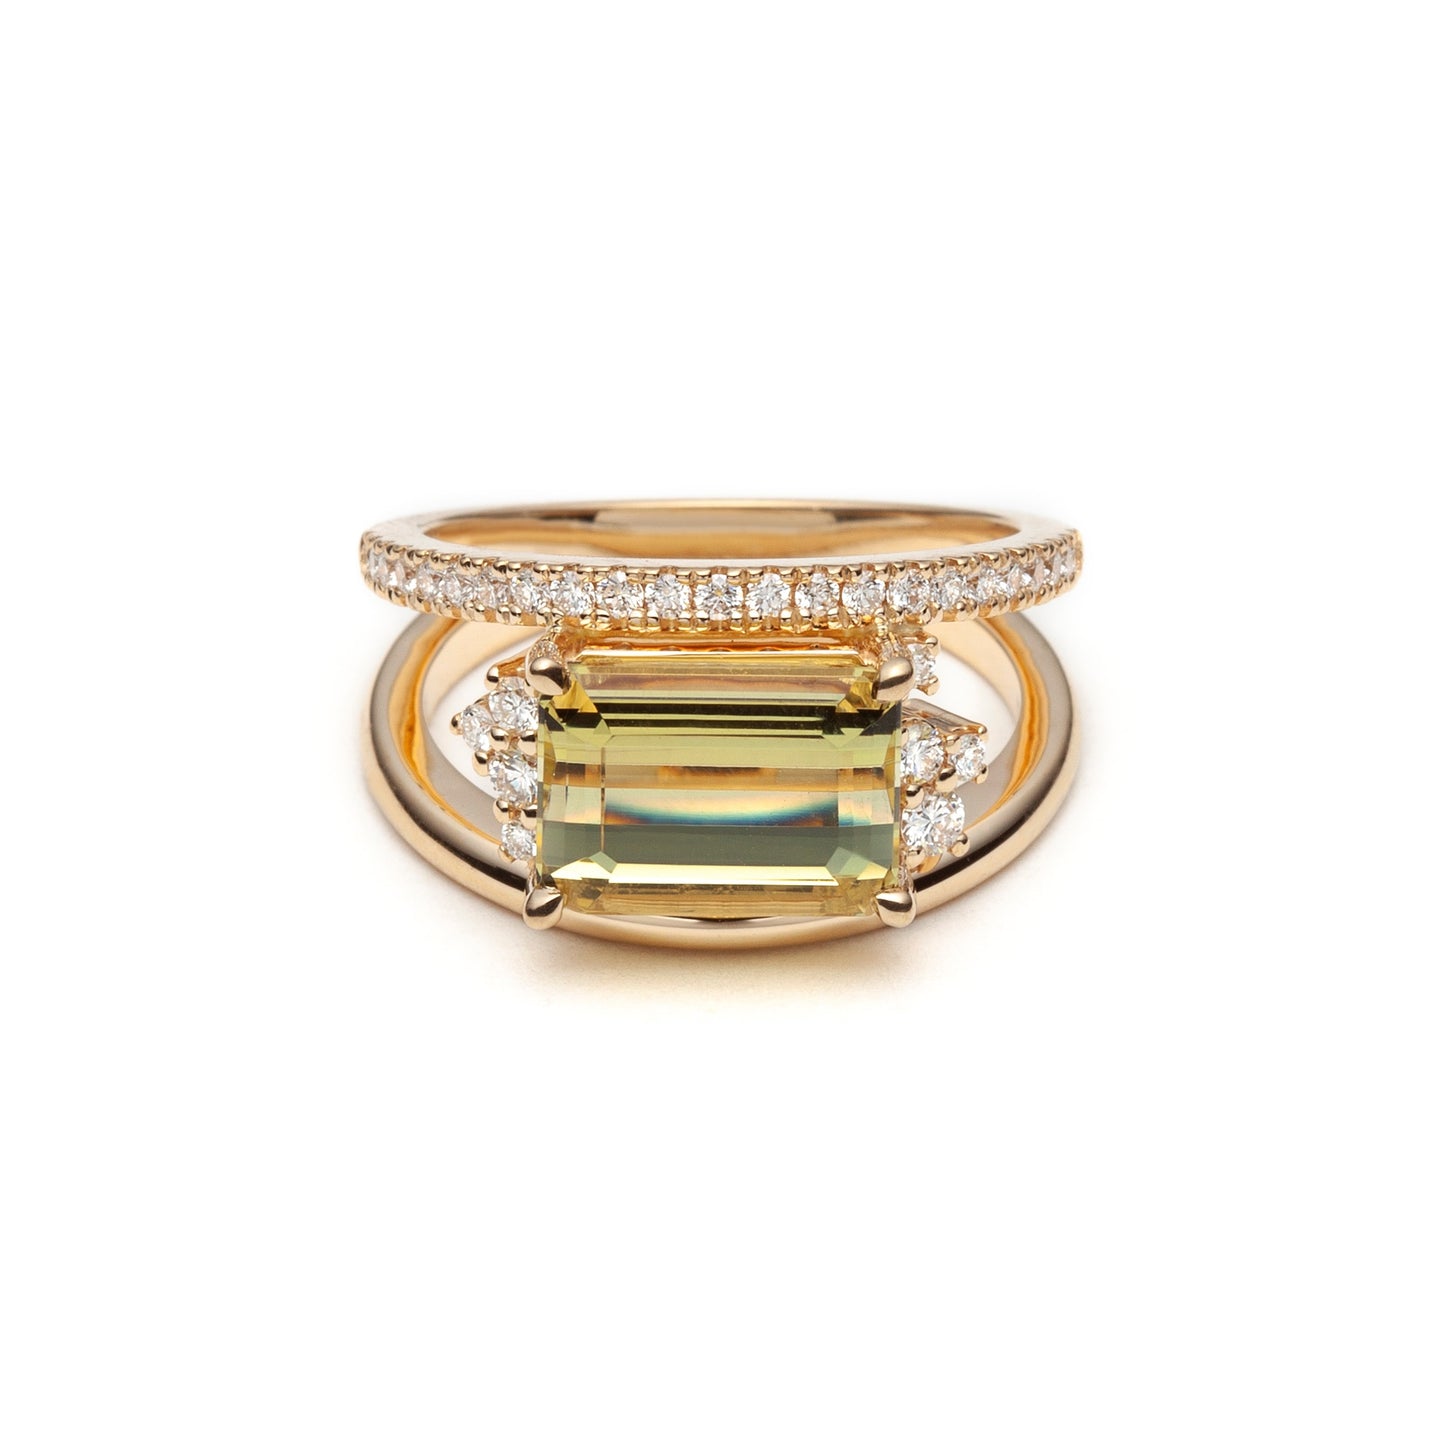 One of a Kind Asymmetric Golden Beryl and Diamond Ring